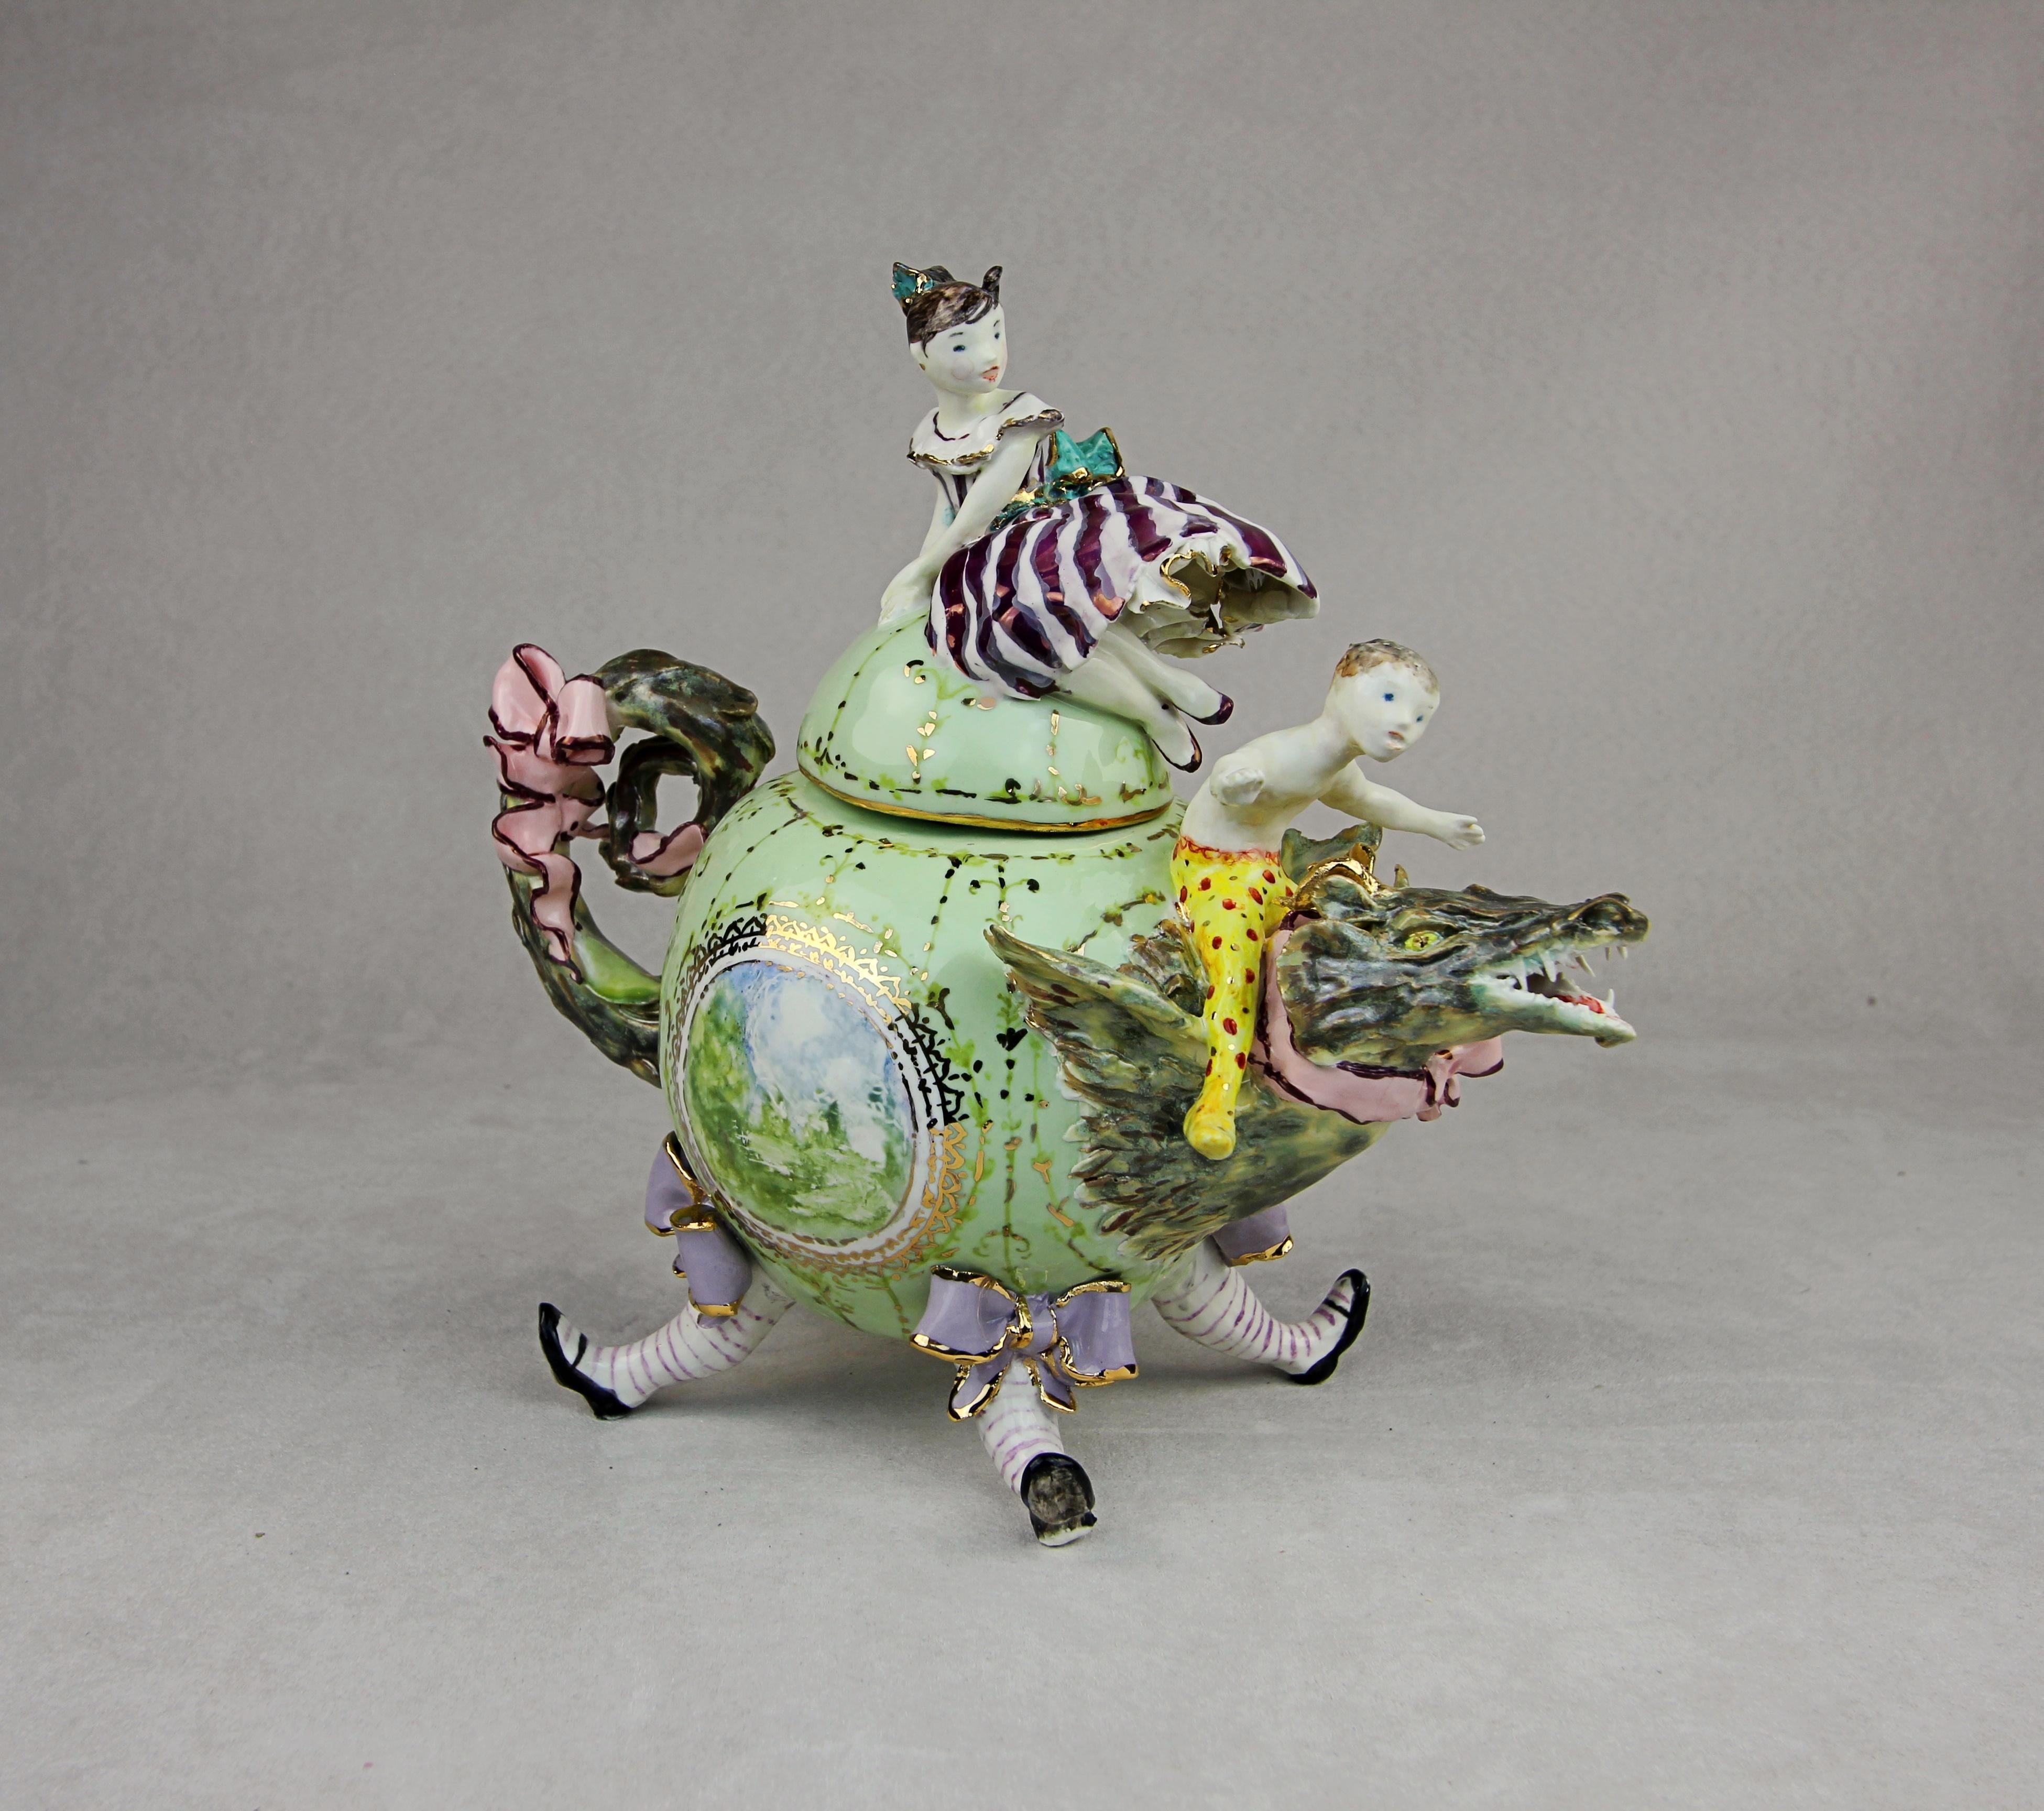 Baroque Porcelain Dragon, Handmade in Italy, Handcrafted Design 2021 For Sale